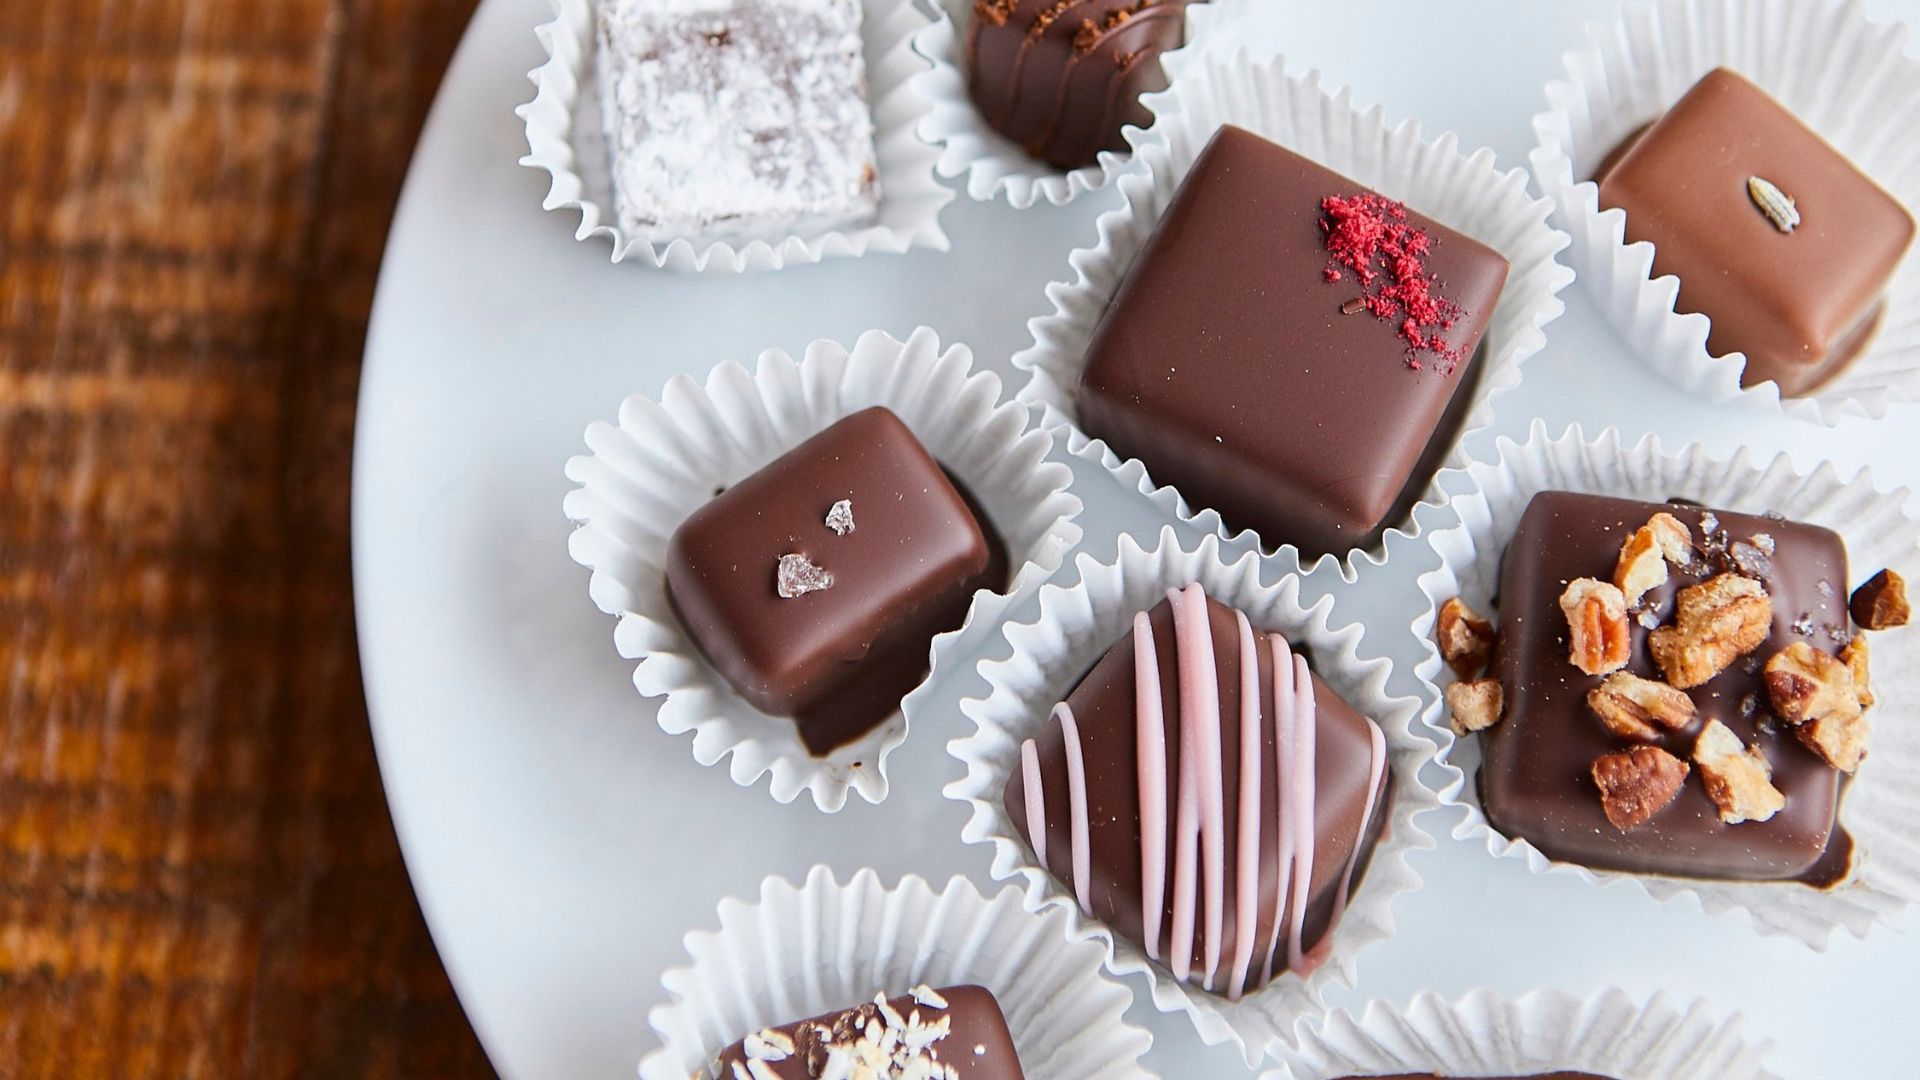 Kakao Chocolate specializes in handcrafted truffles like these.